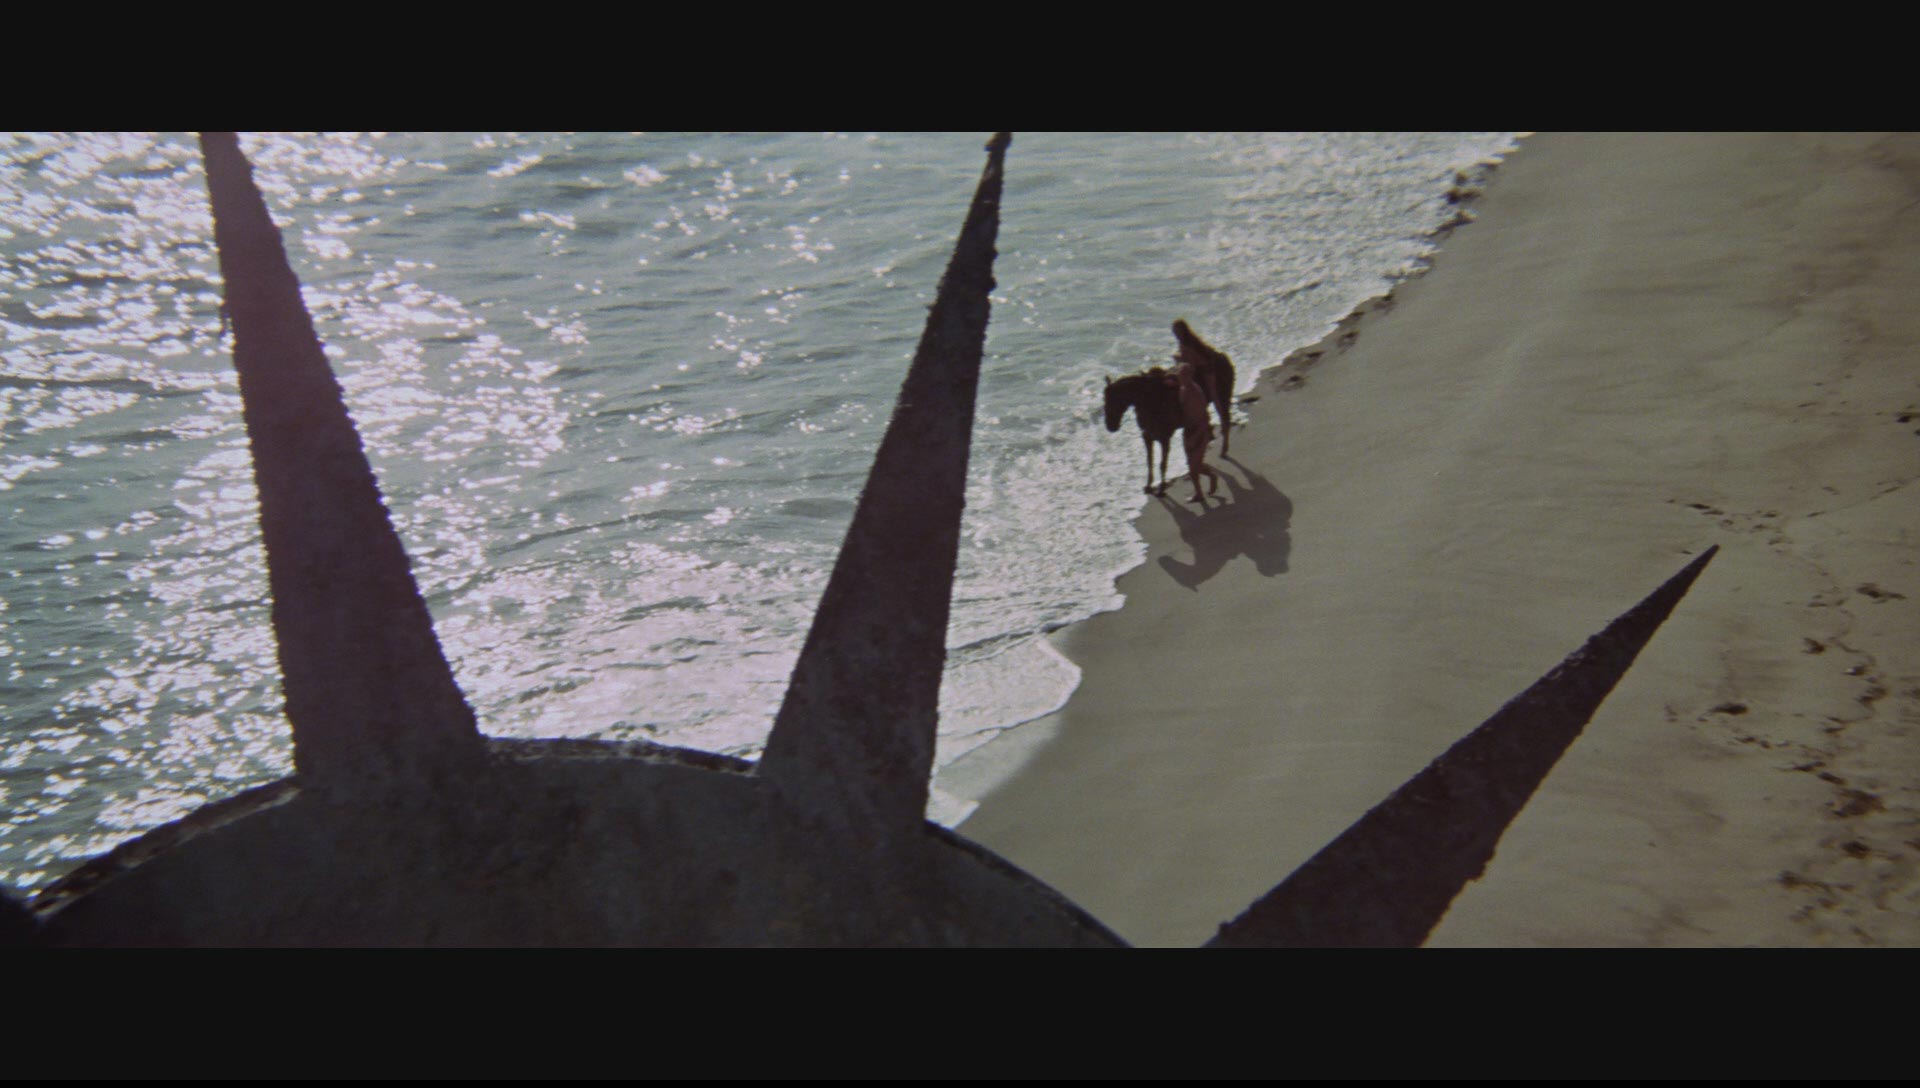 planet-of-the-apes-statue-of-liberty-blu-ray-disc-screencap-hd-1080p-02.jpg